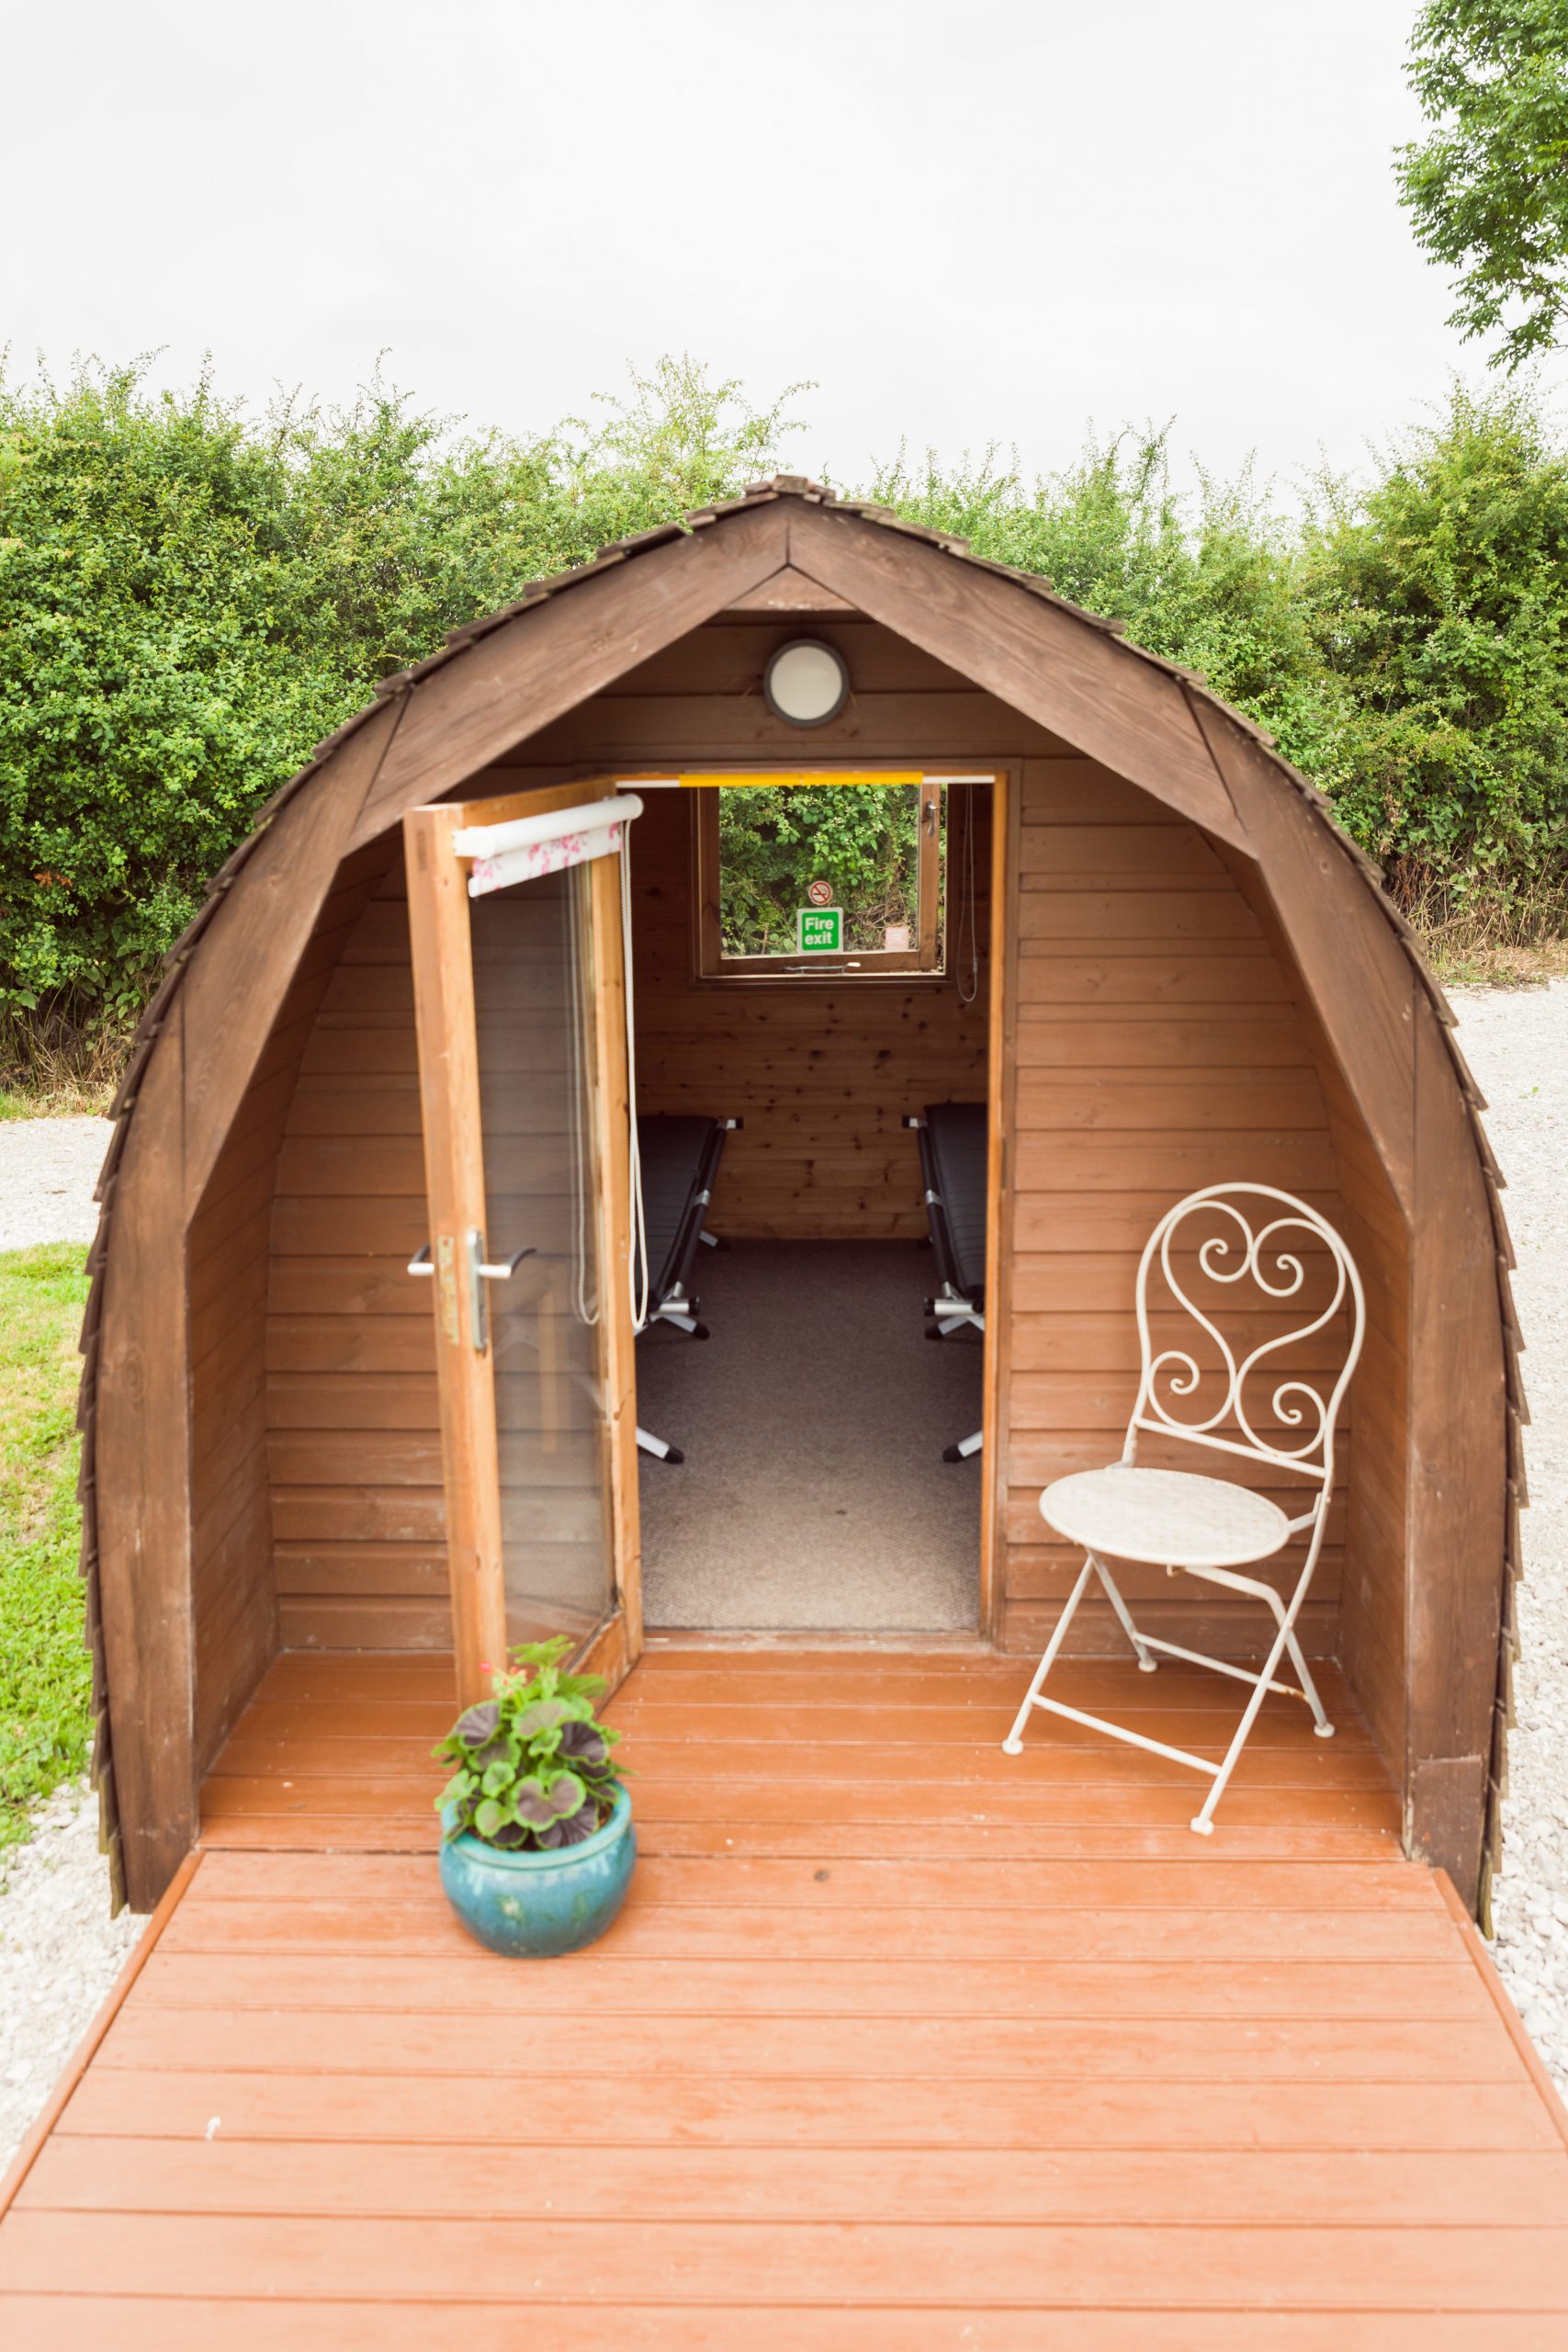 Pitch and Canvas | Glamping and Camping in Cheshire | Pod with doors open